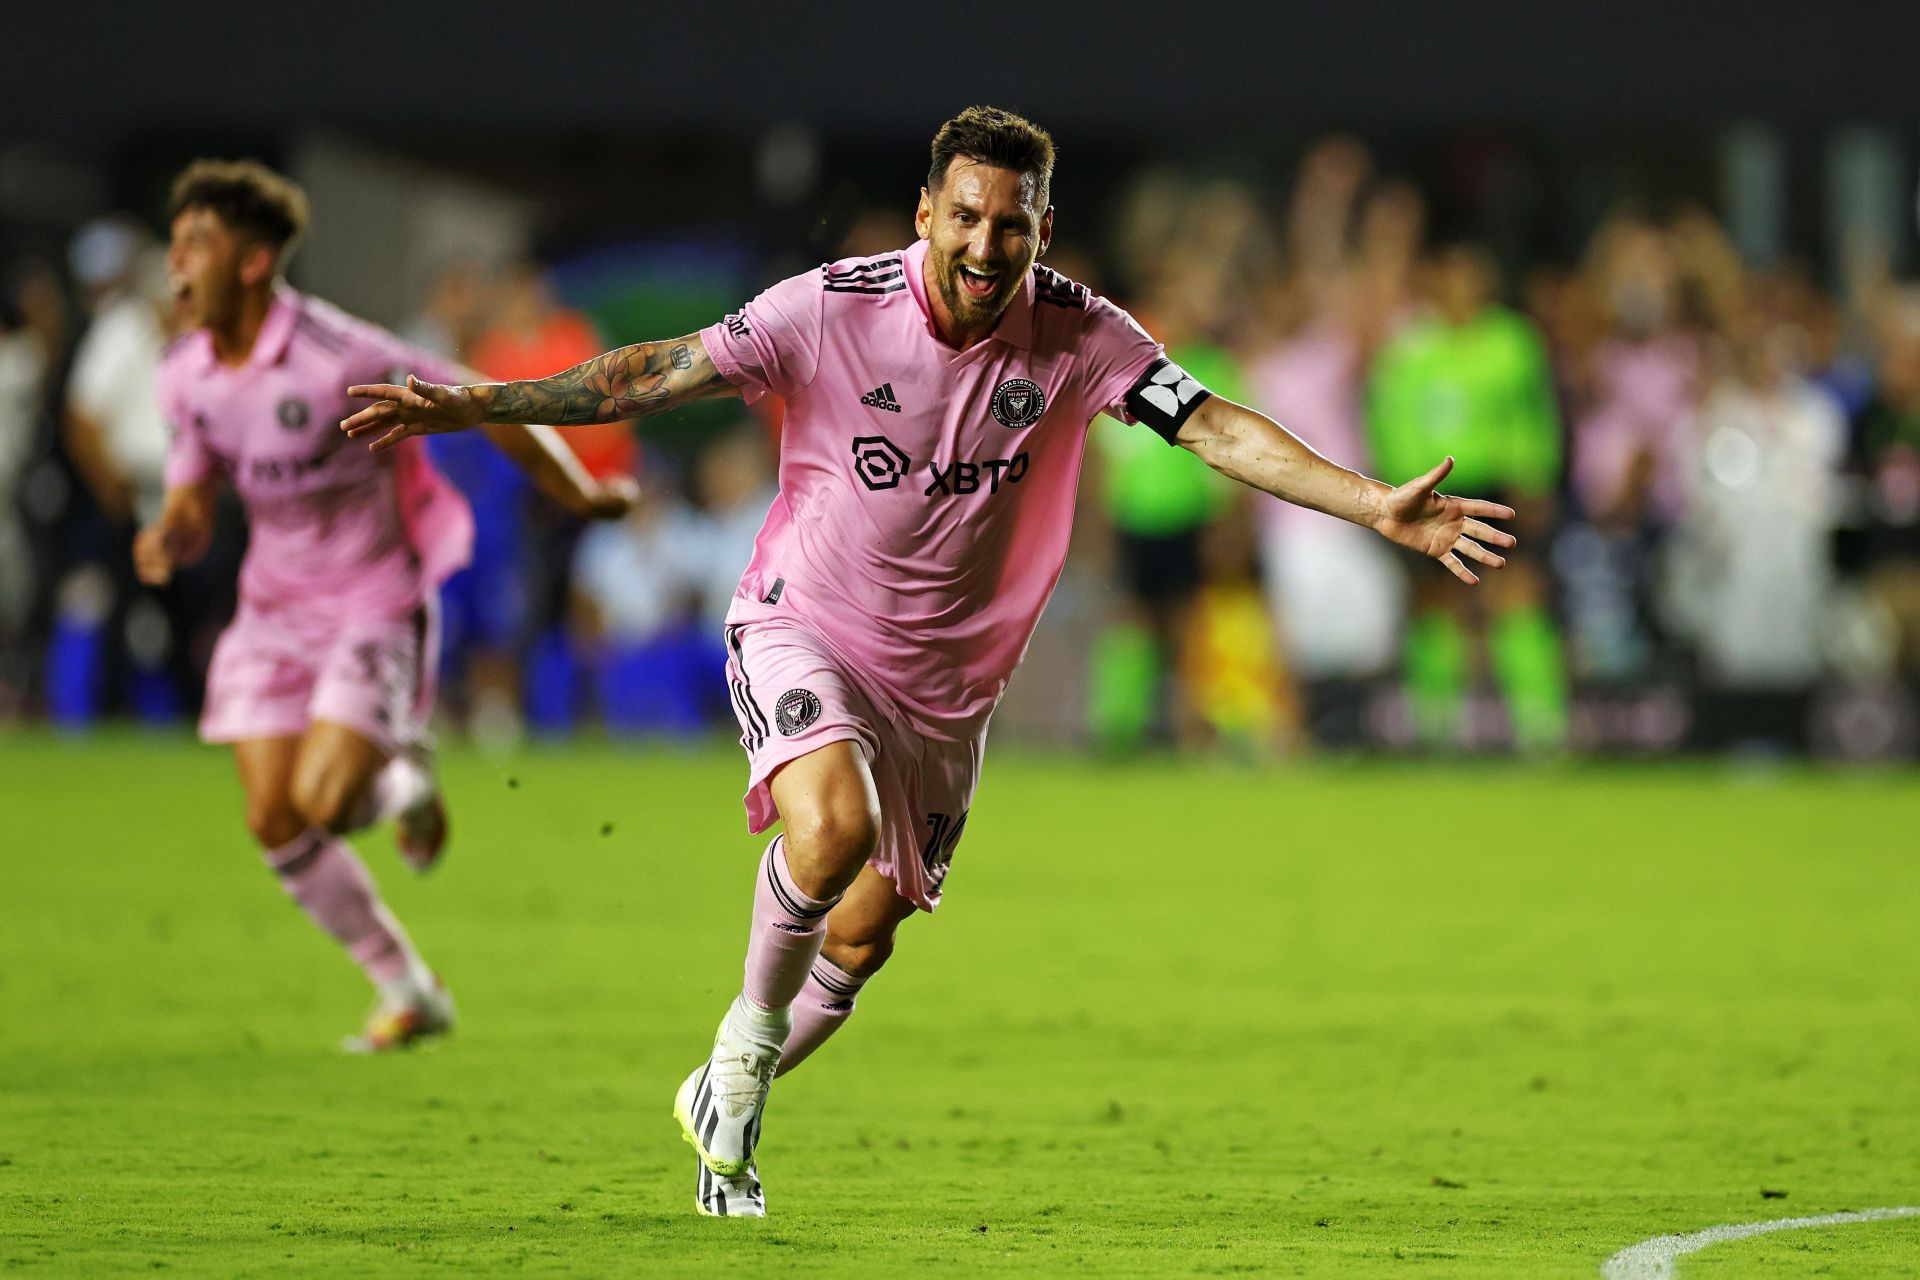 Lionel Messi has bagged free-kick goals for Inter Miami.